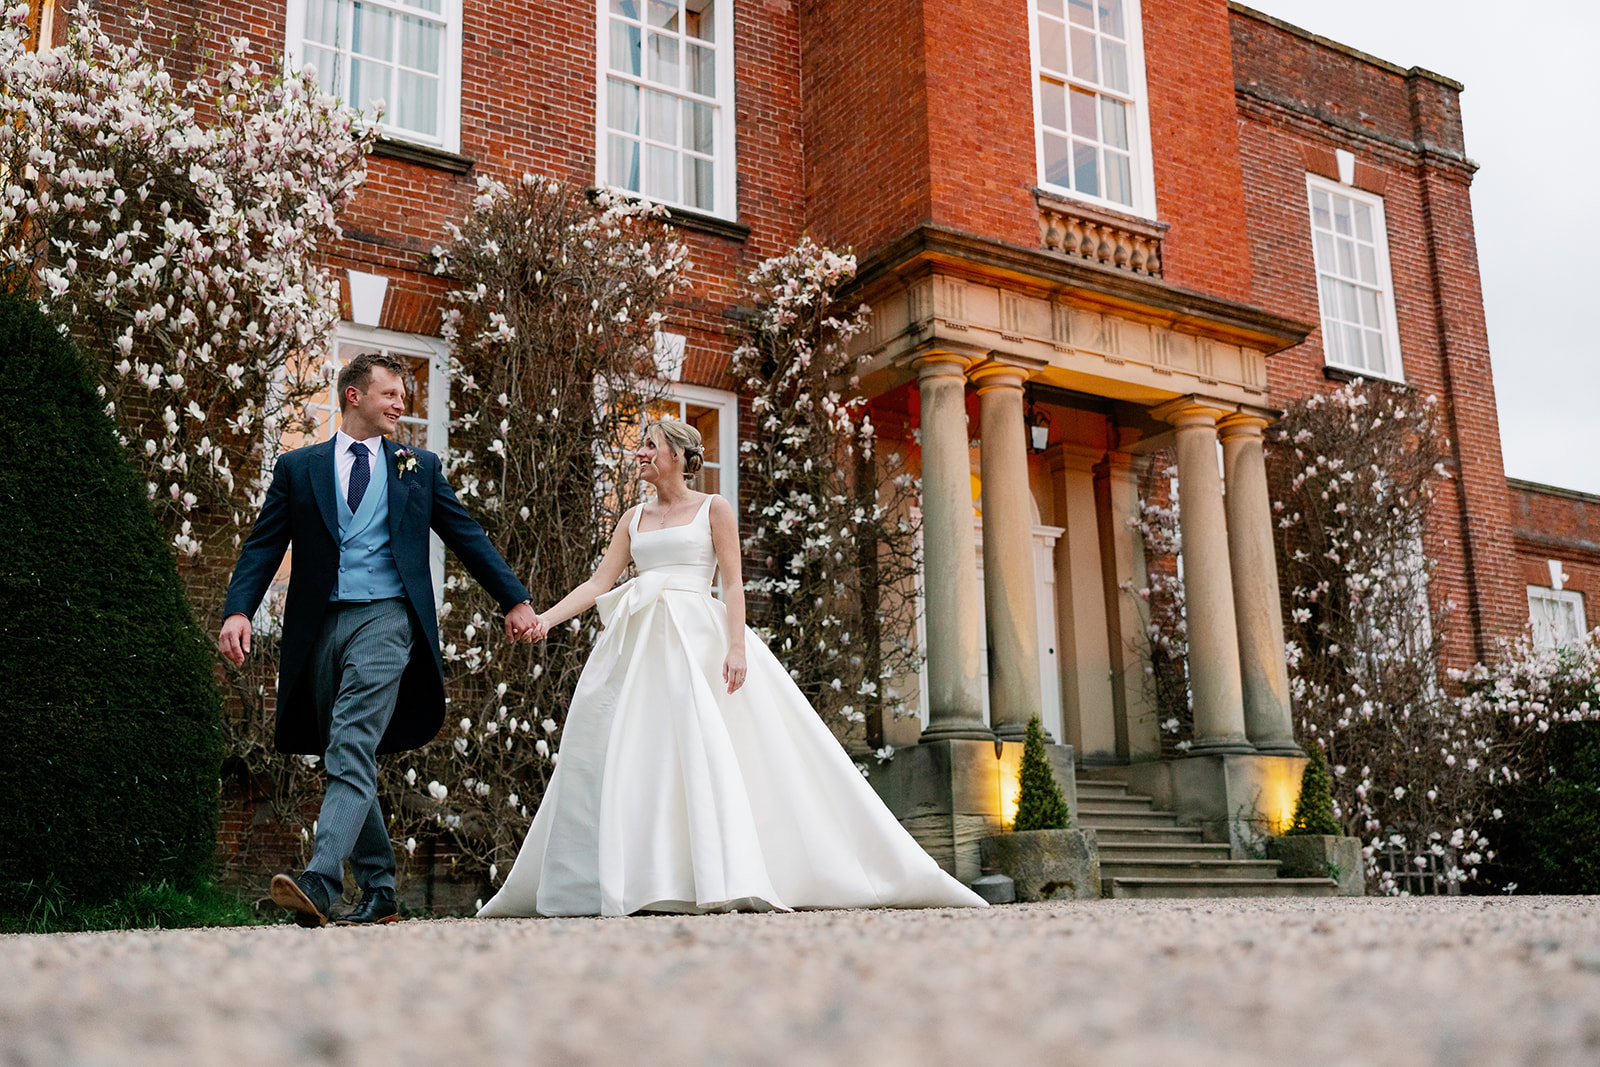 wedding couple walking in front of the main house at Iscoyd Park